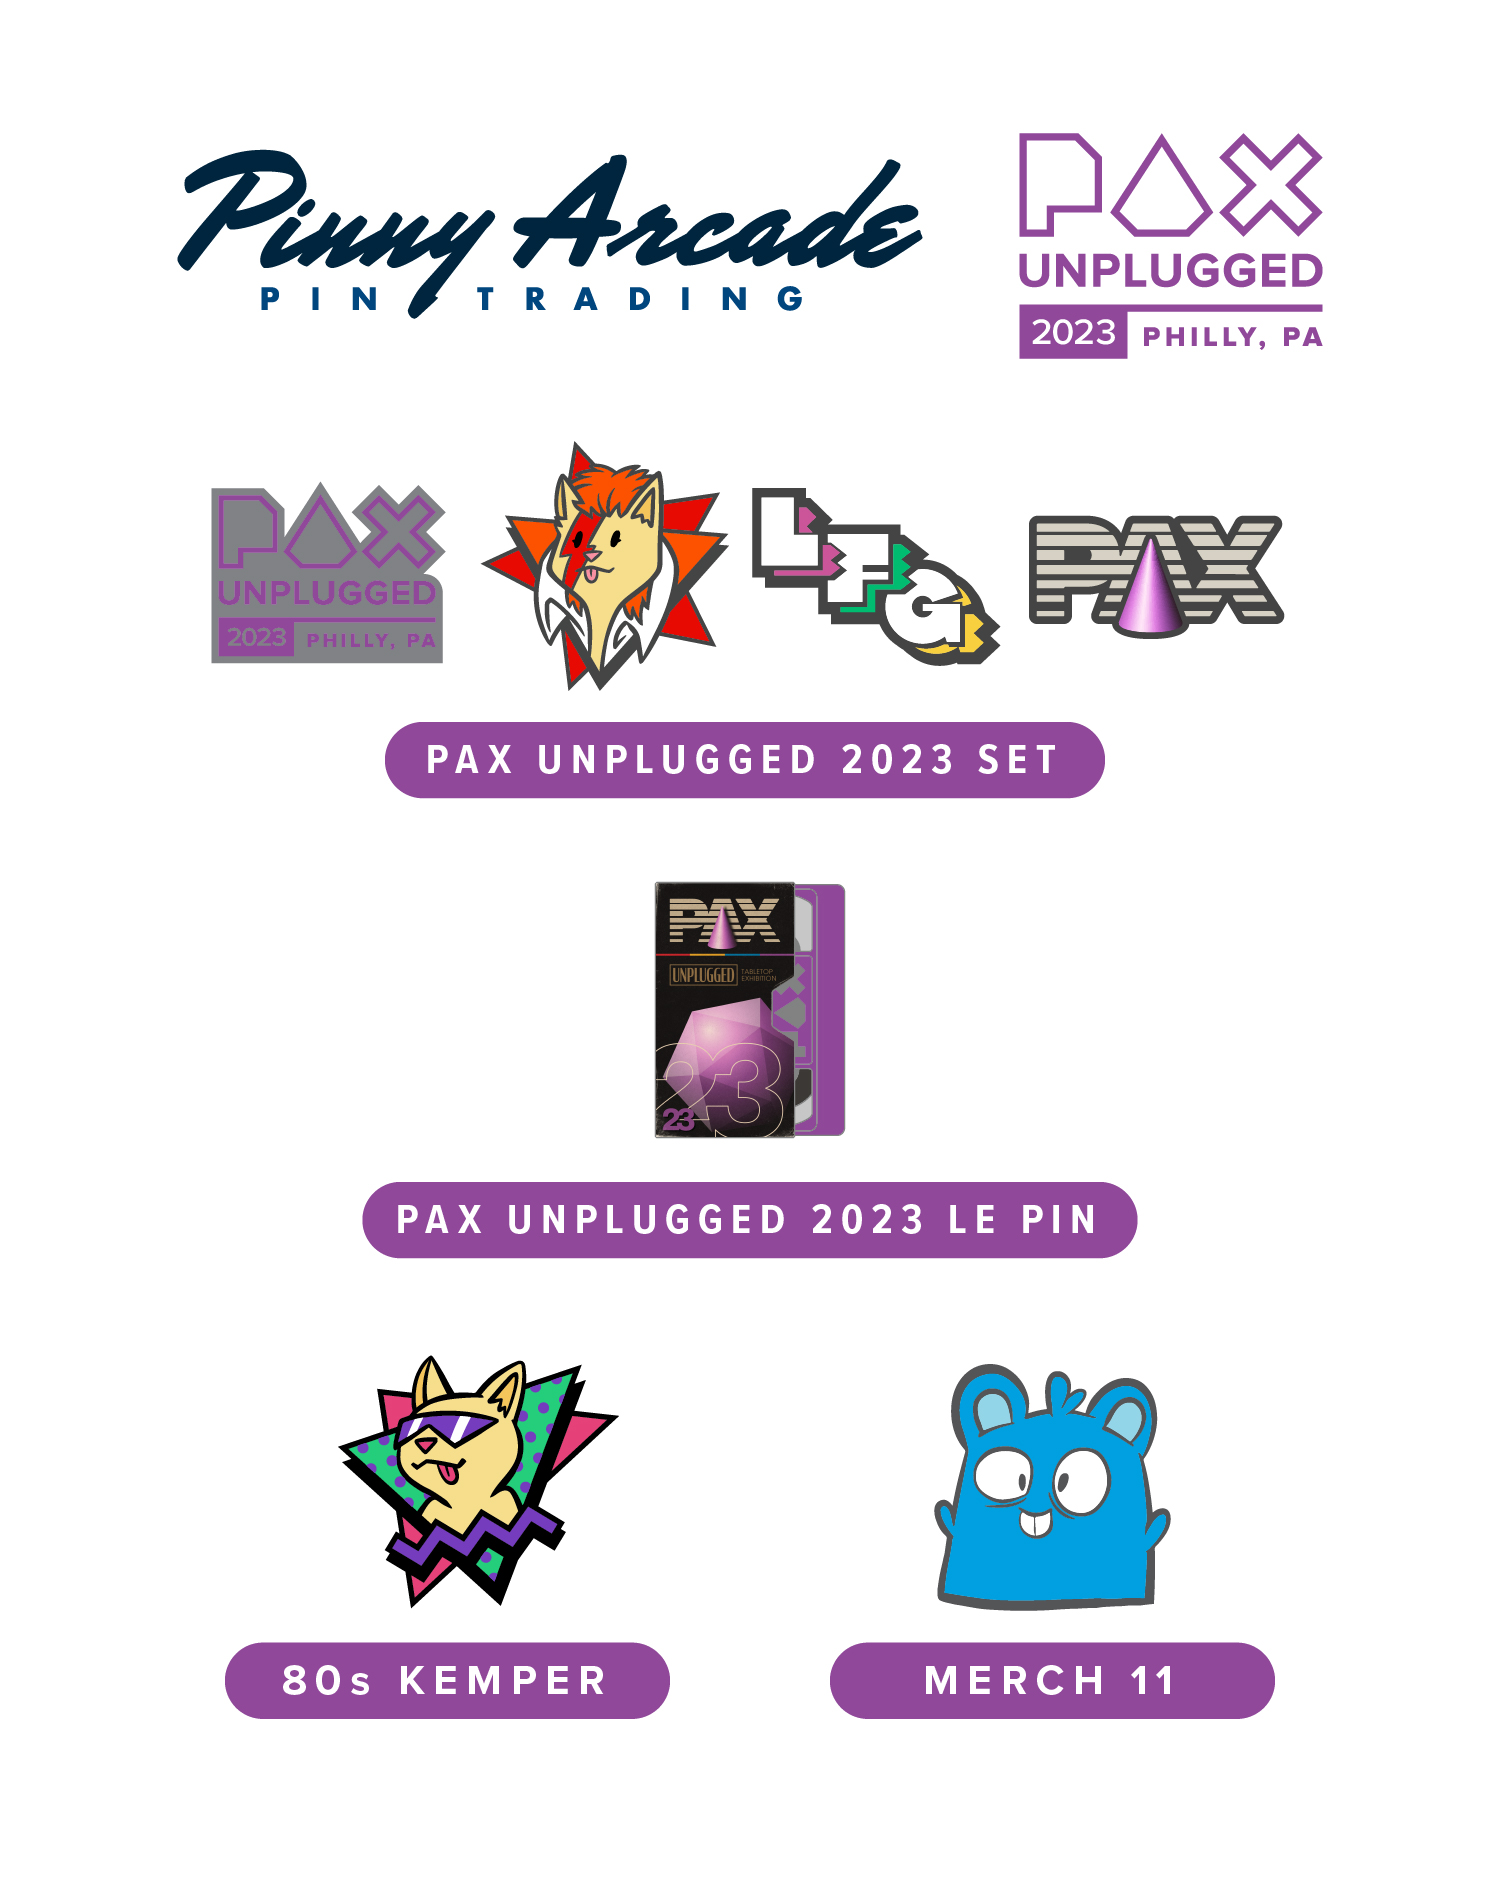 PAX Unplugged 2023 Show Pins